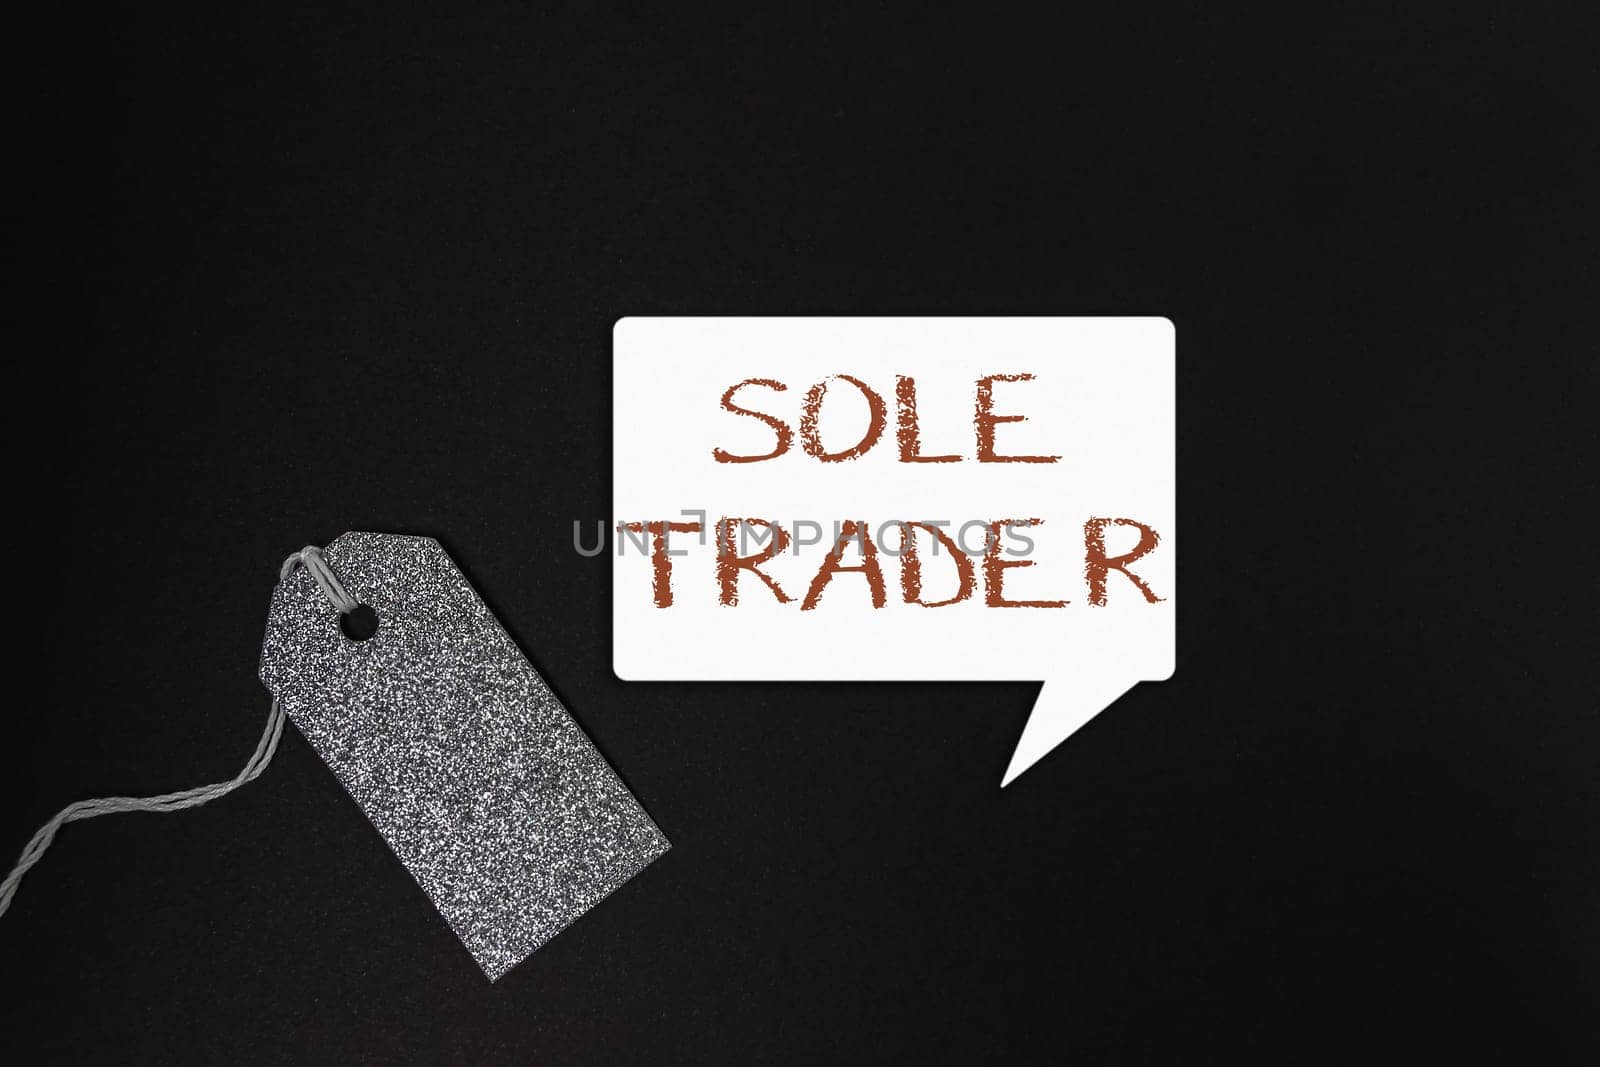 A tag with the word Sole Trader written on it. The tag is hanging from a chain. The image is black and white